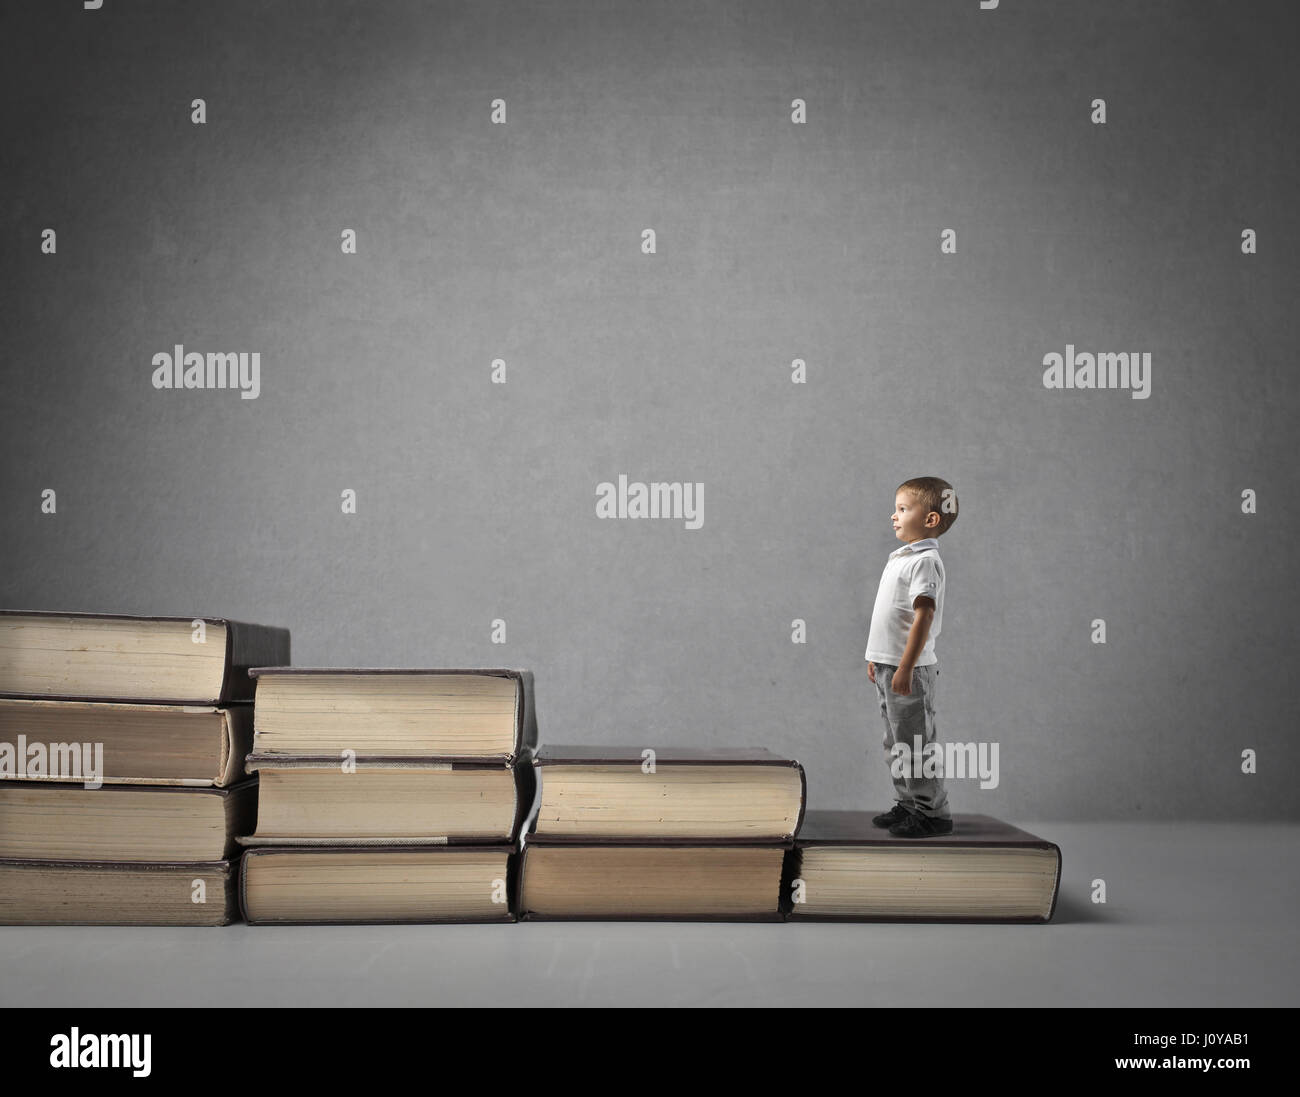 Little boy standing on stair made out of books Stock Photo